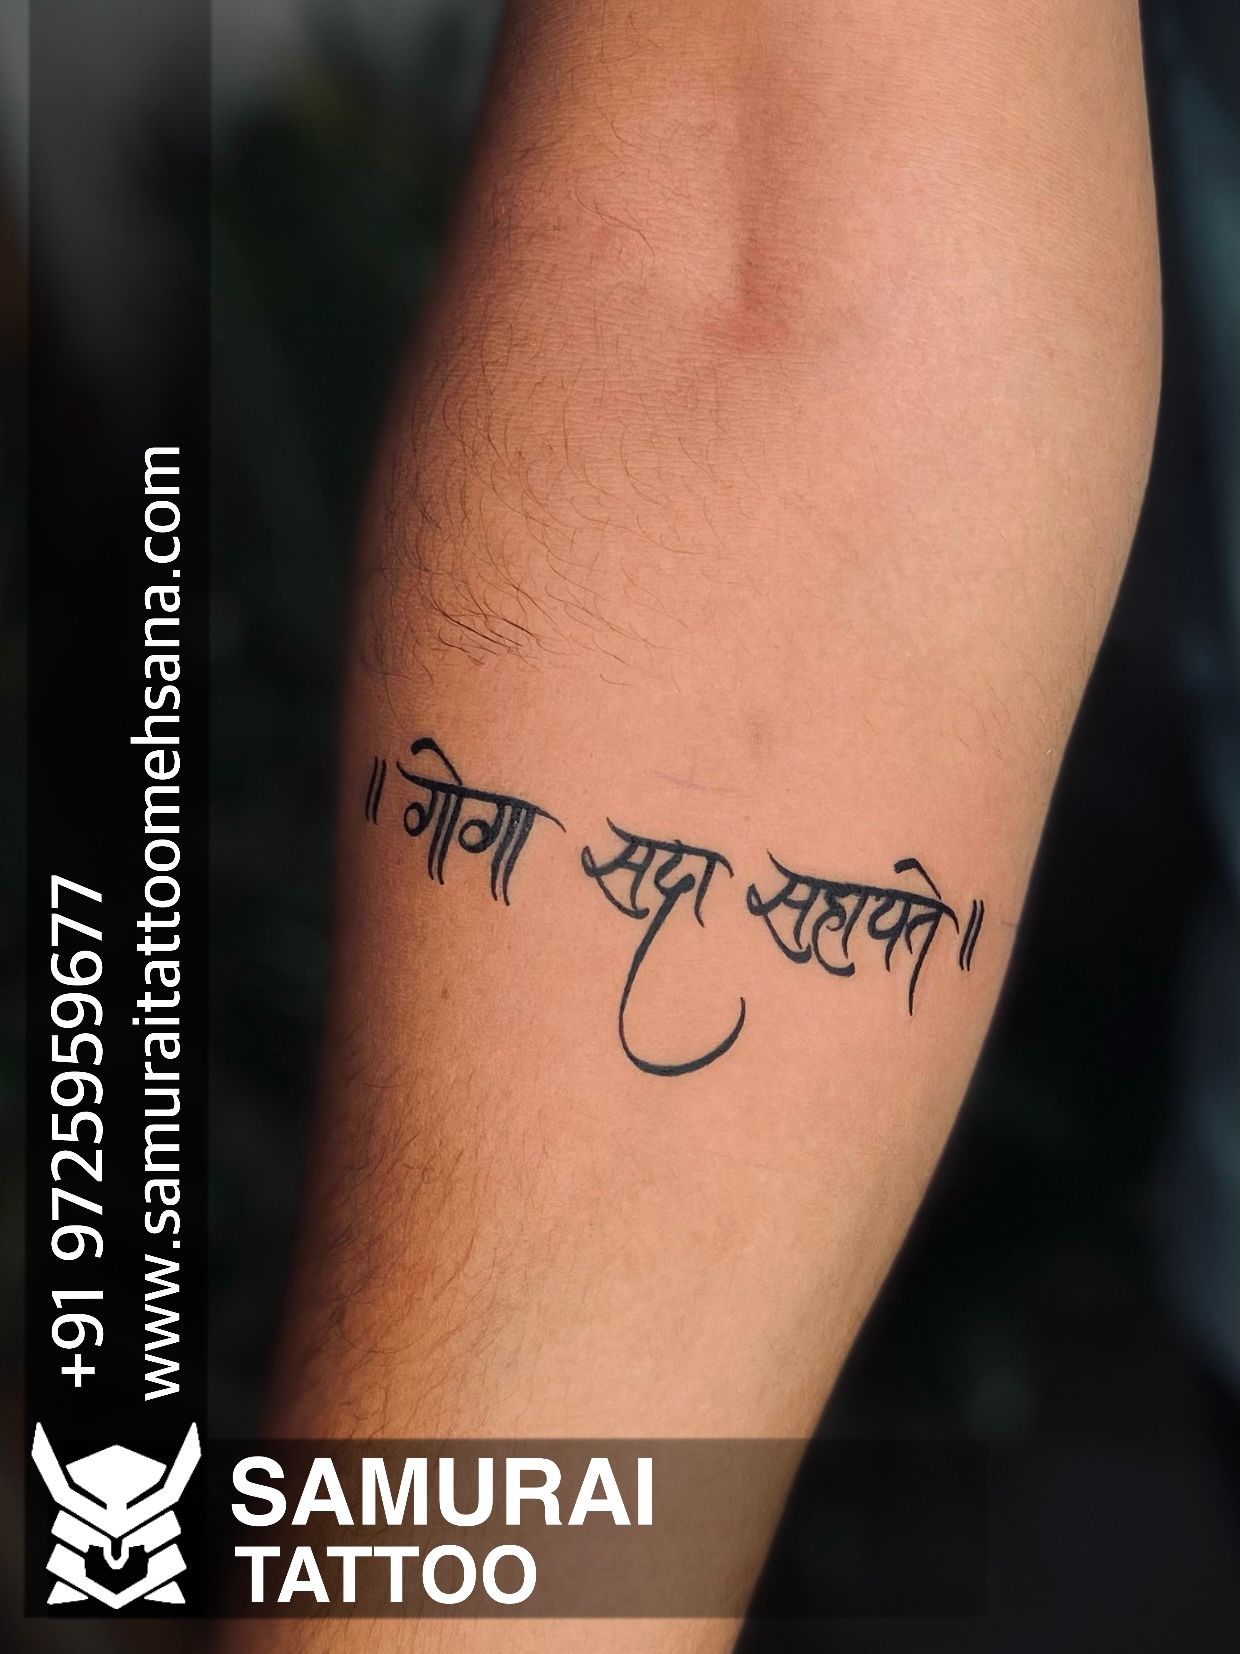 Mom dad with goga maharaj arm band tattoo❤️‍🔥👑 7046592262 for appointment  | Instagram